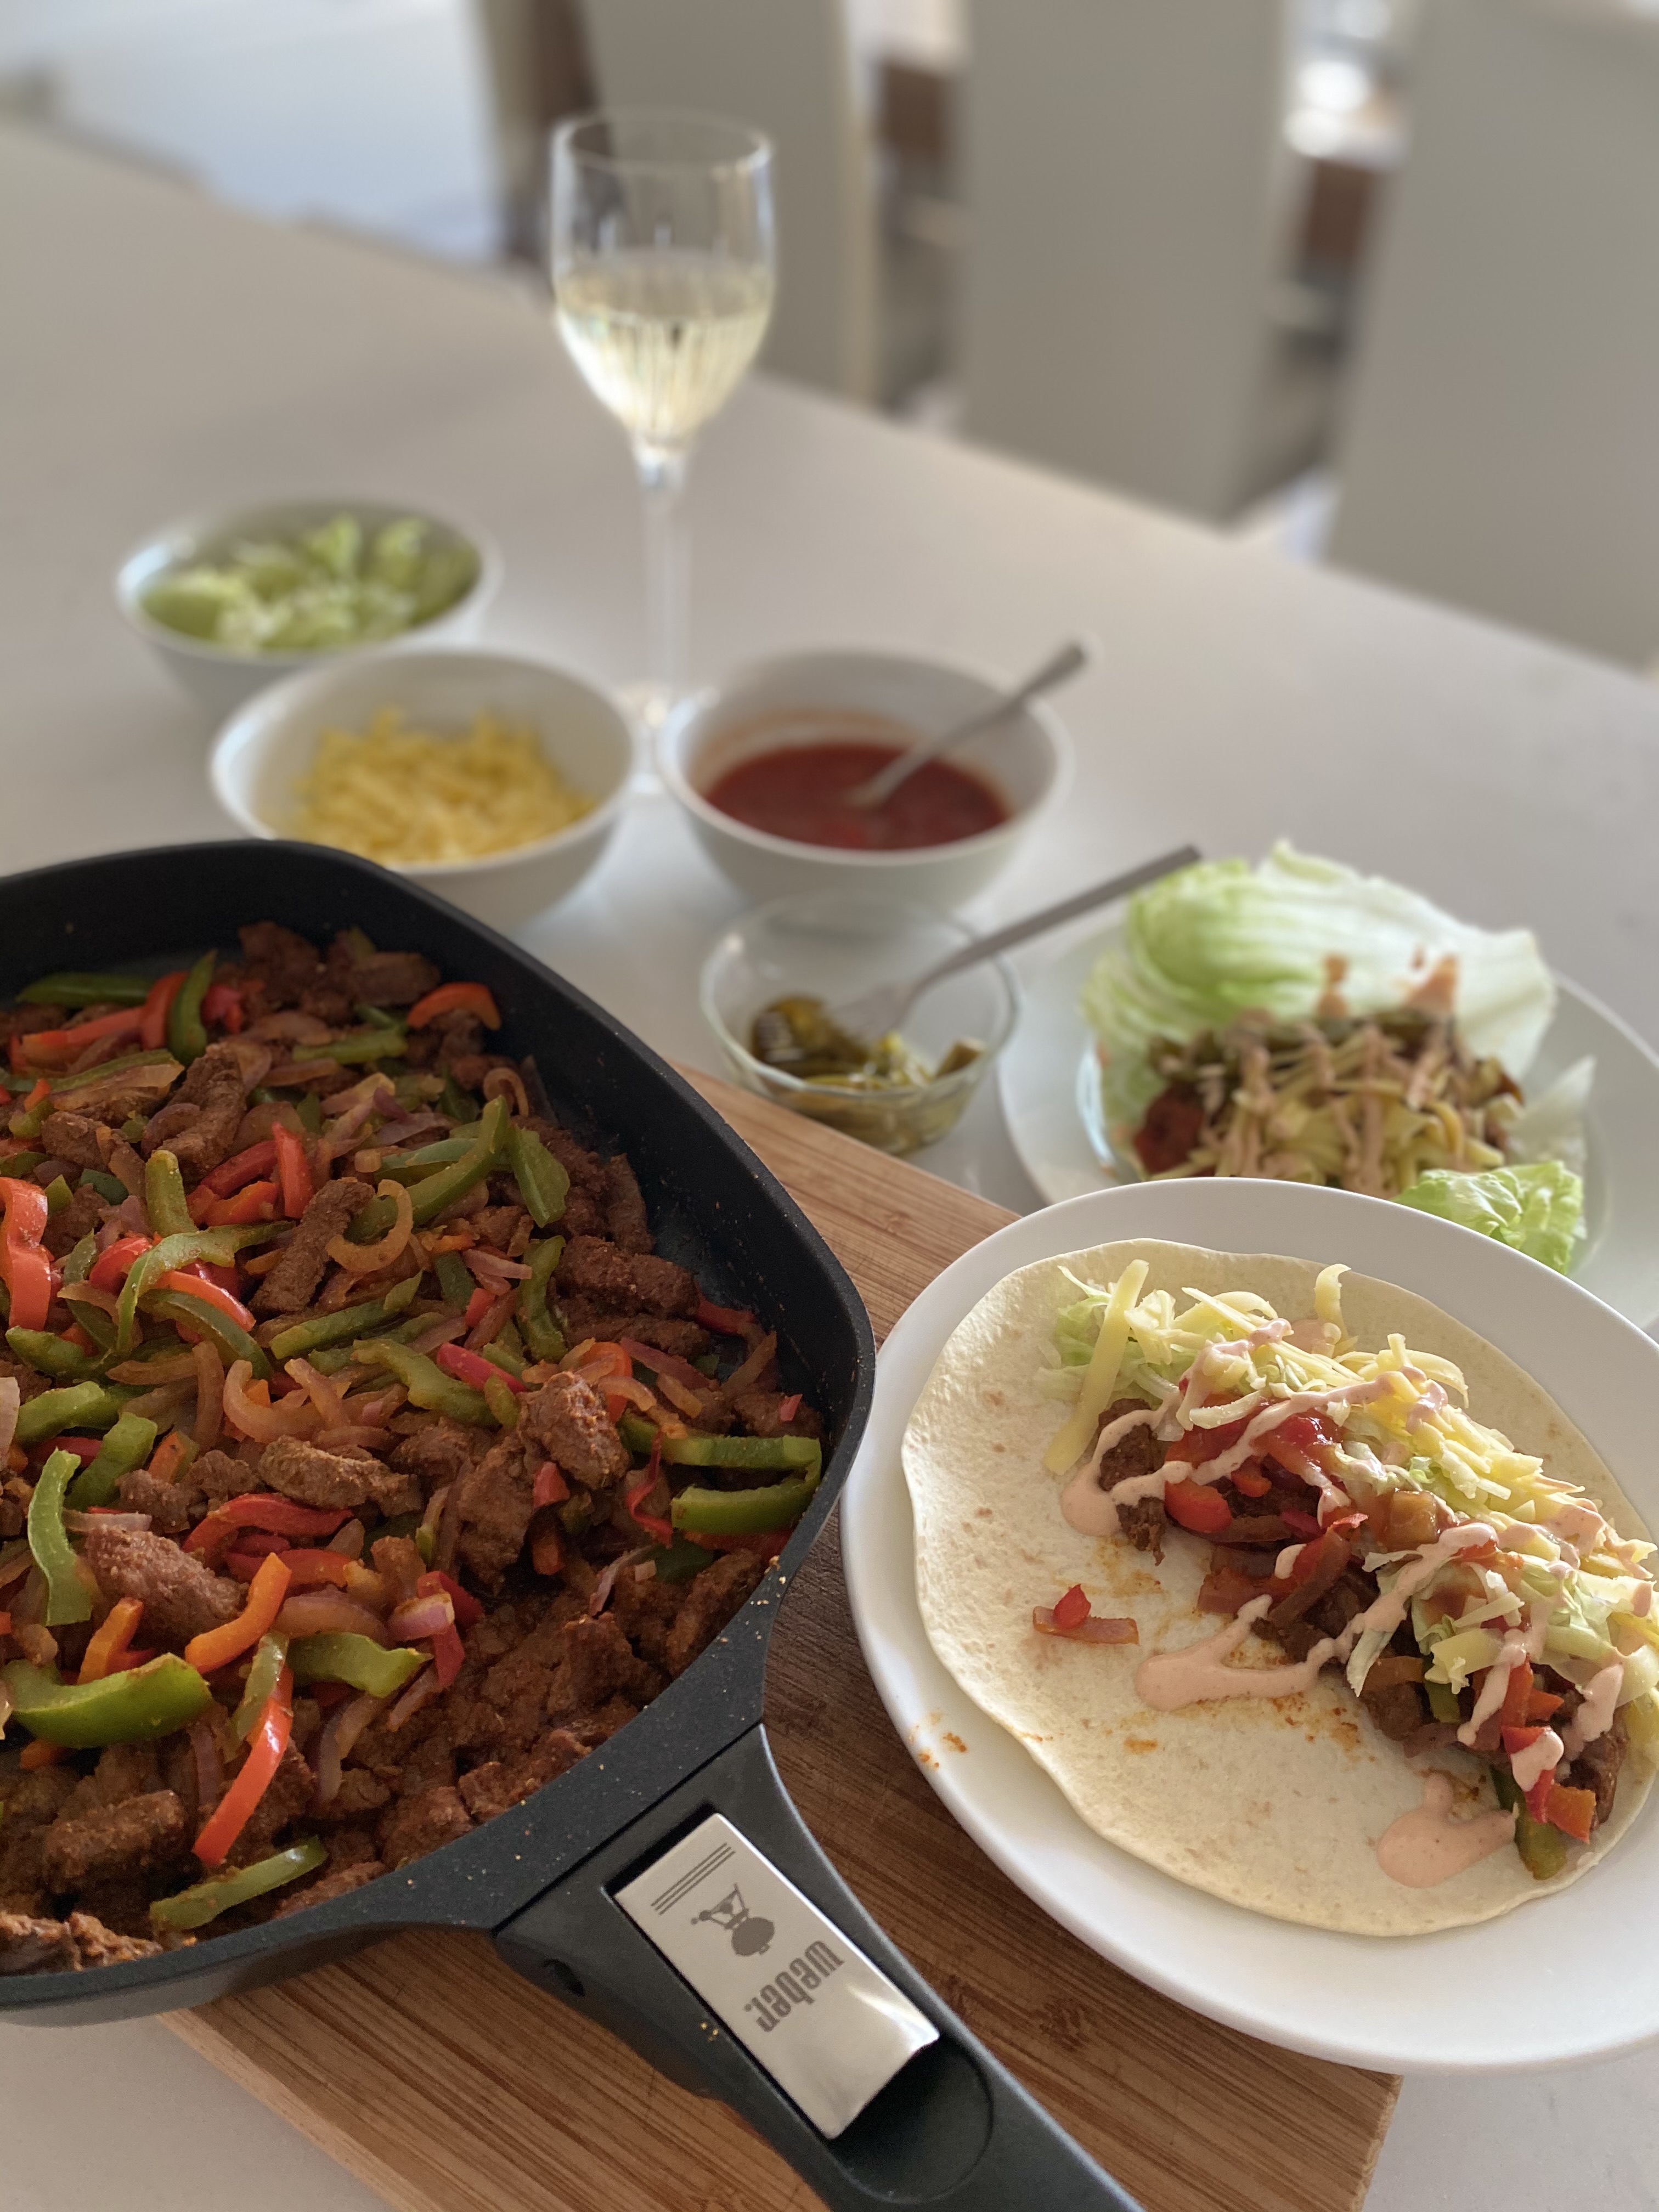 Geoff Maddern’s recipe for the best fajitas you’ll ever have